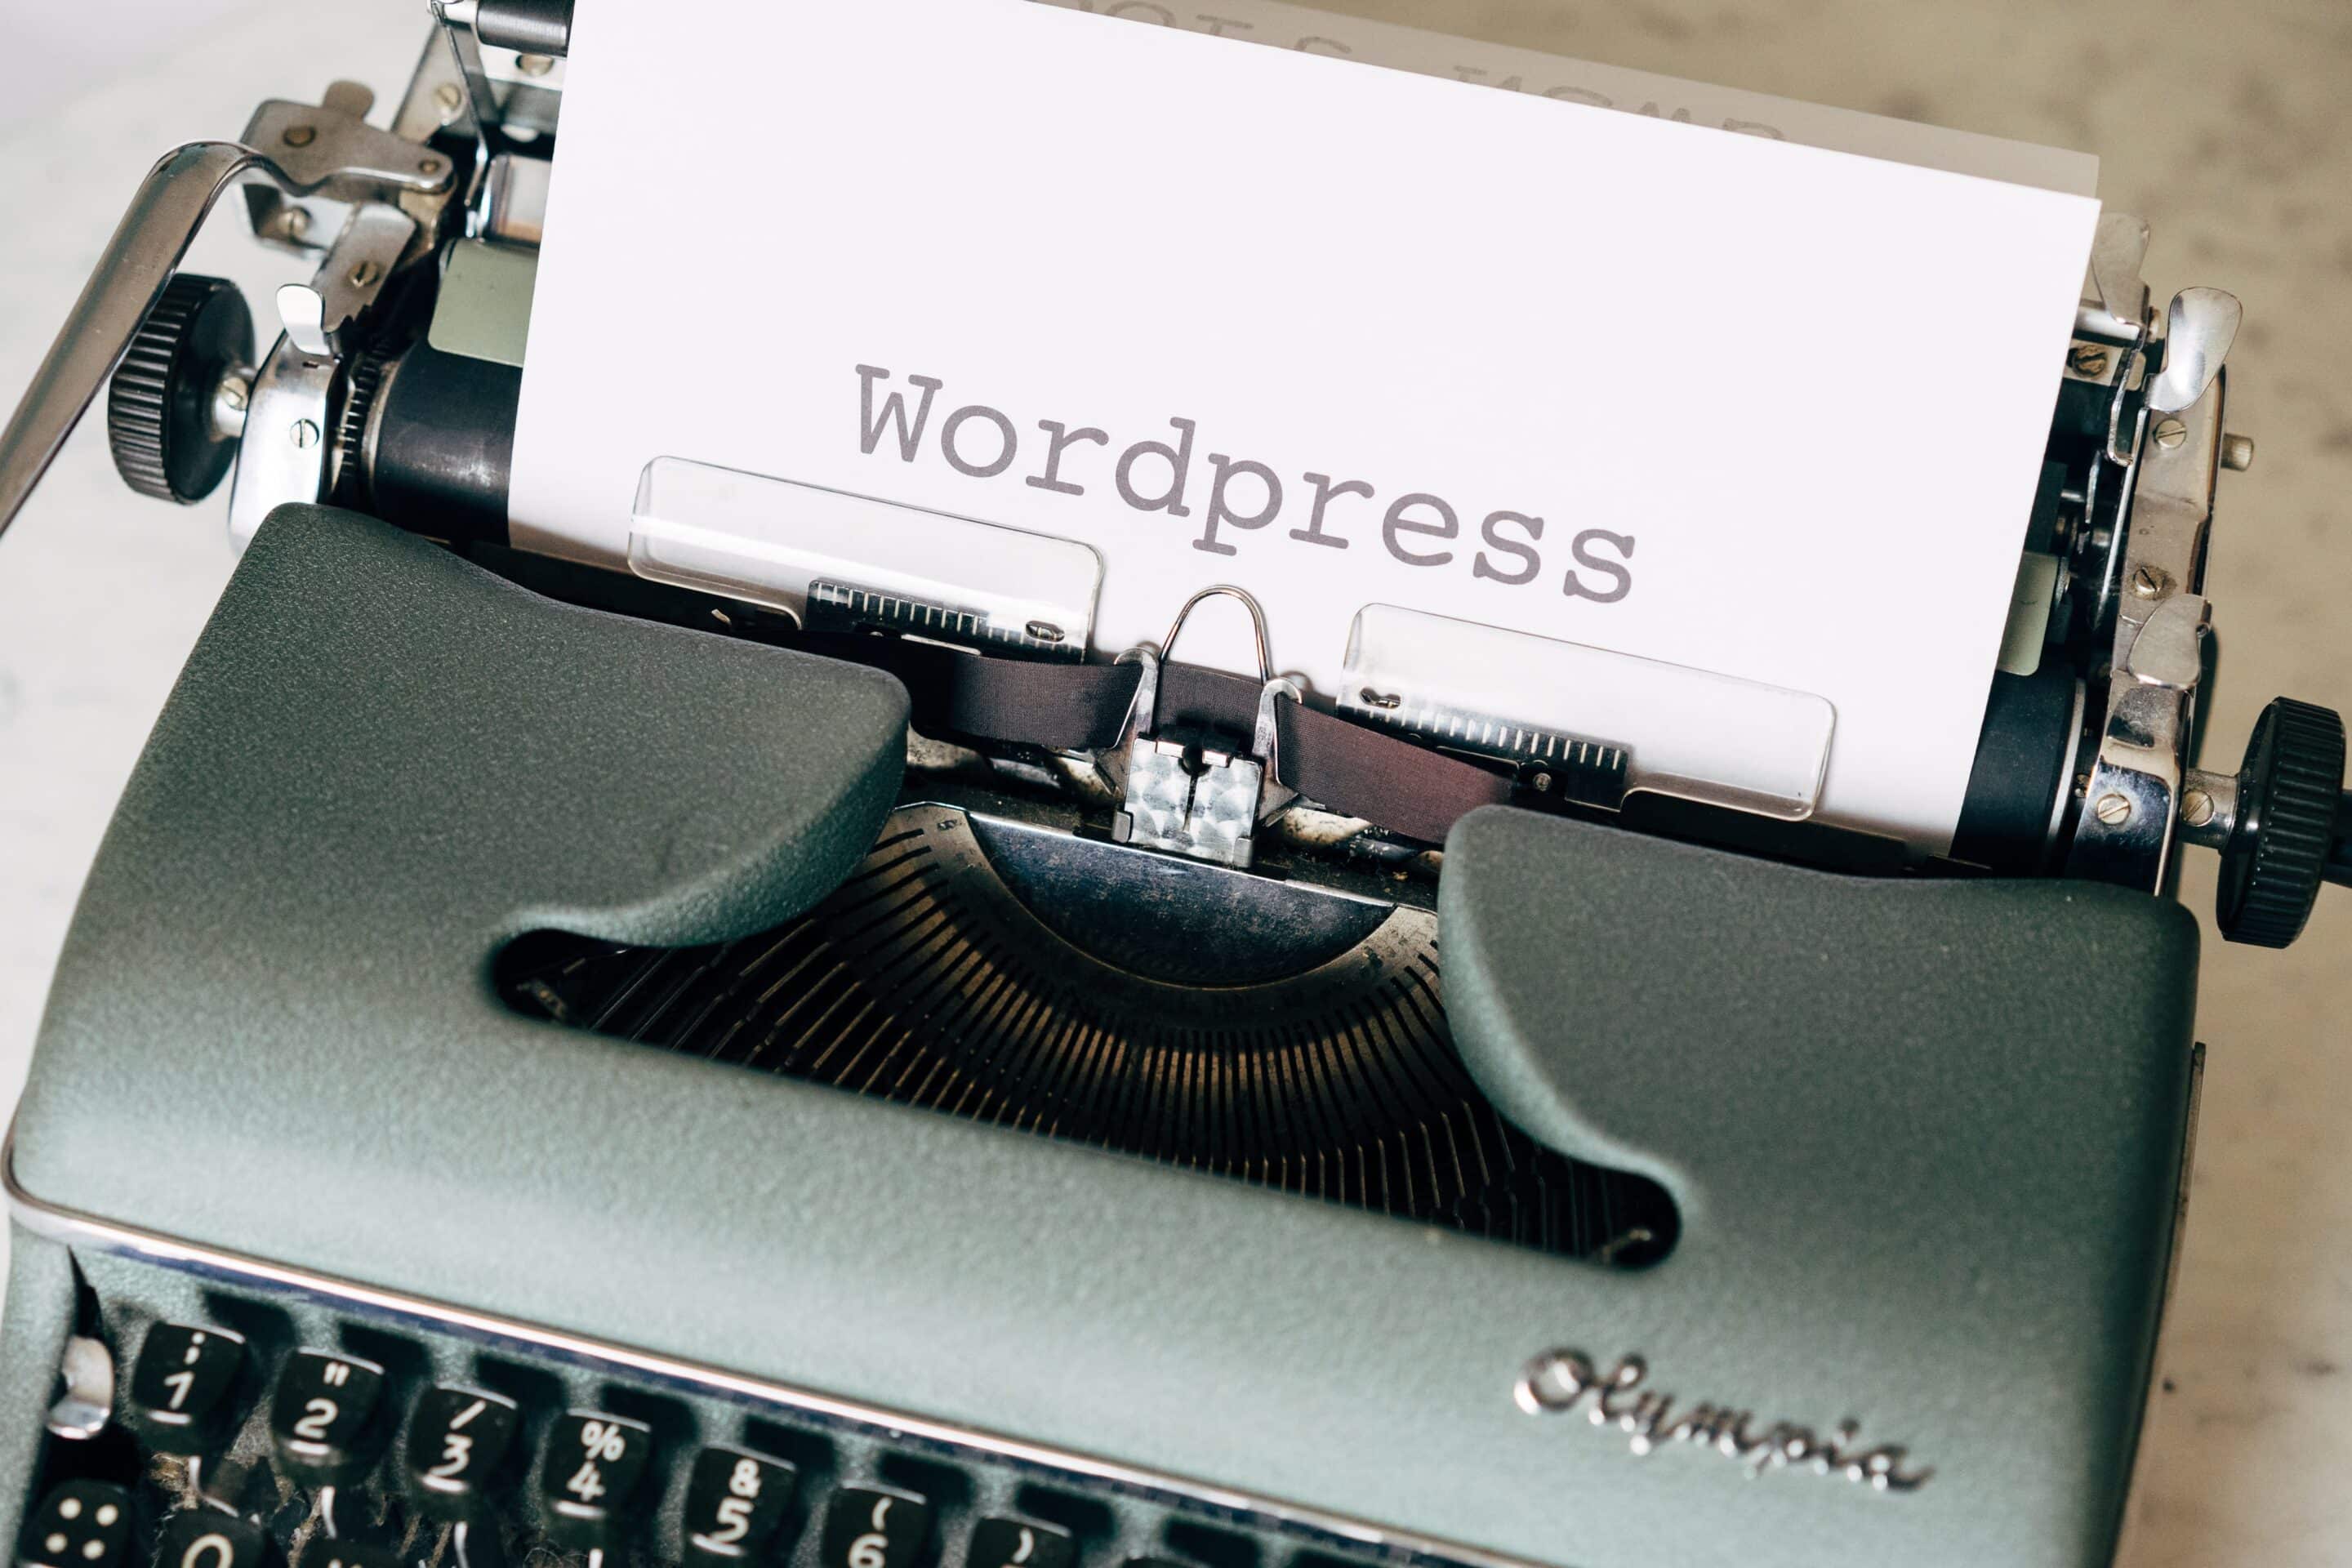 We take care of your wordpress site so you can take care of business.